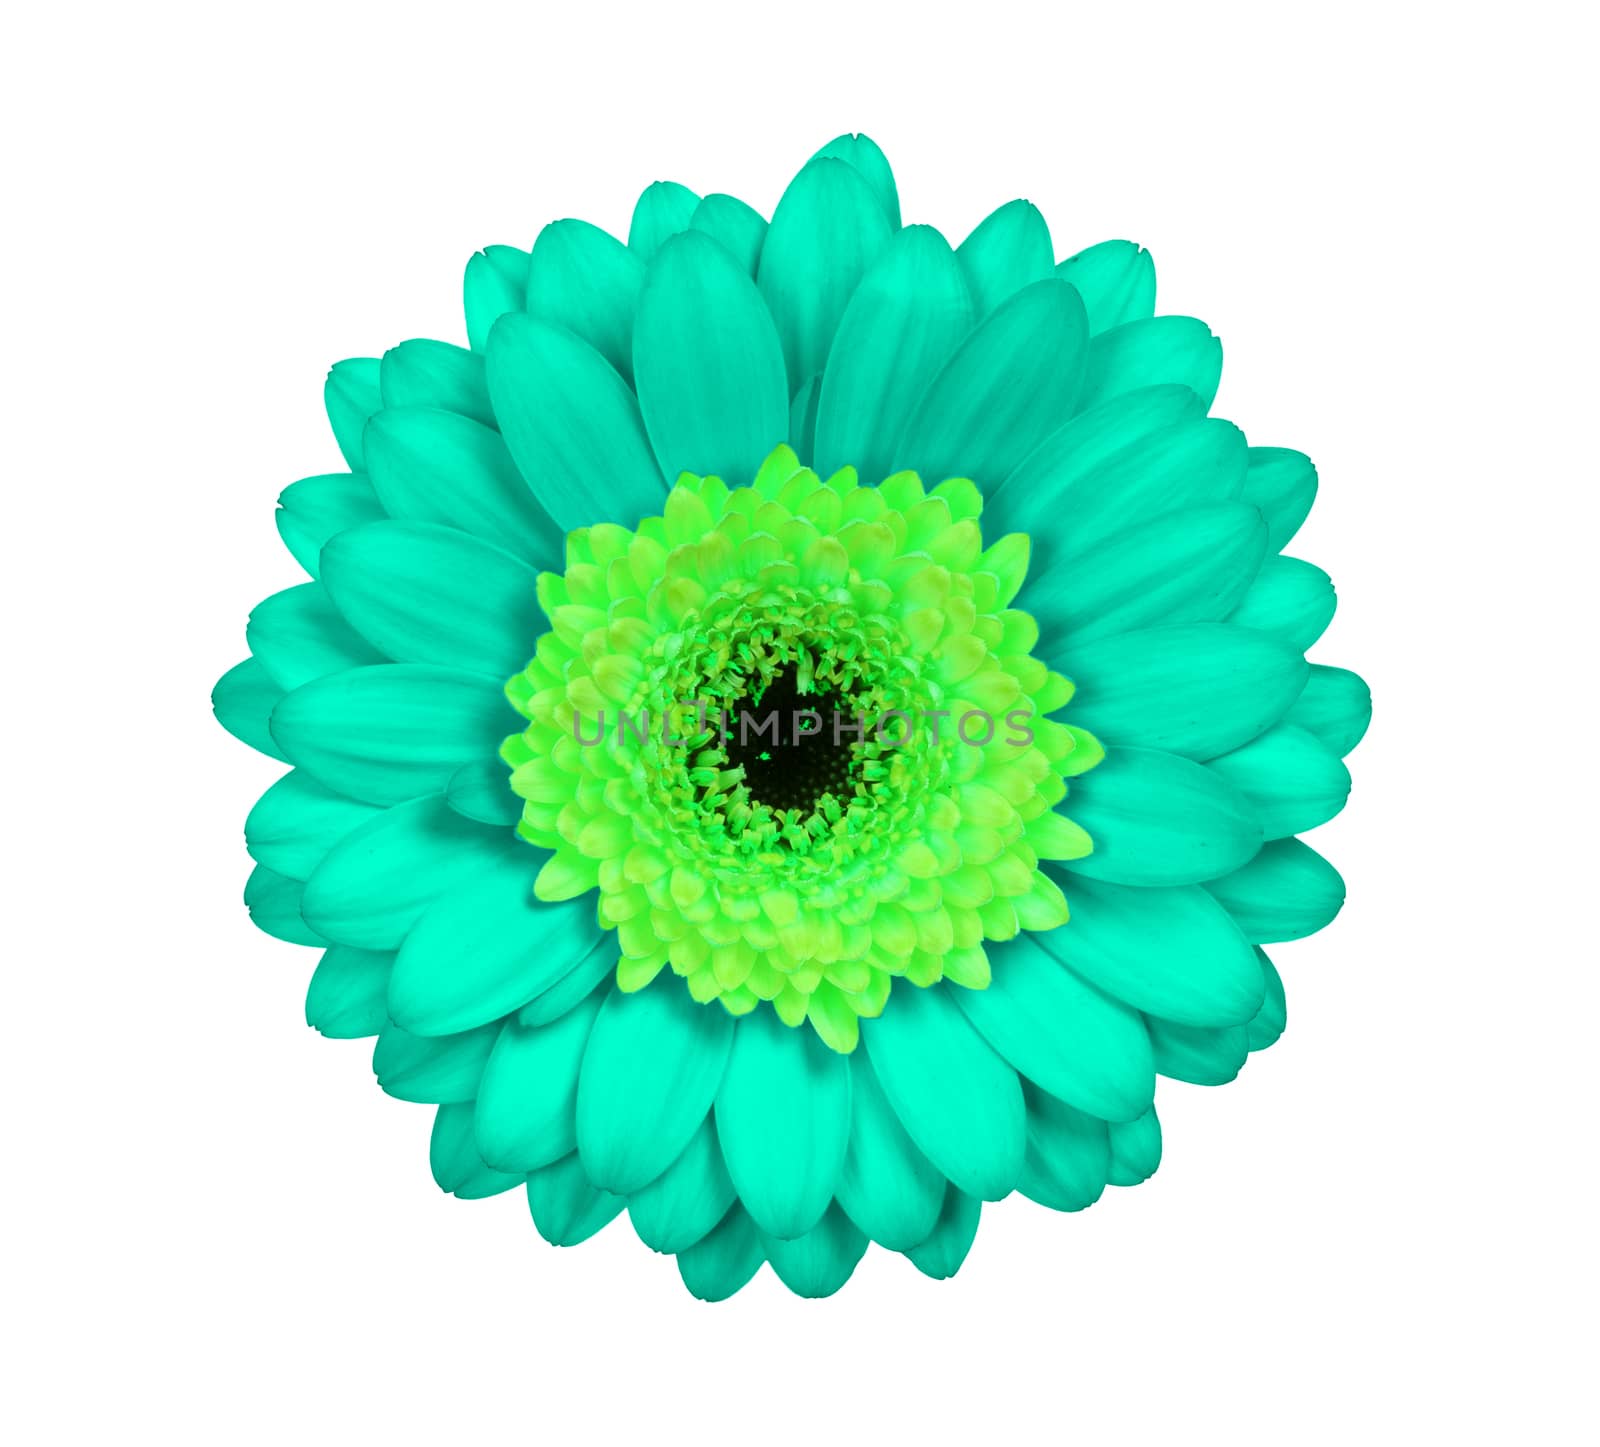 Gerbera flower isolated on a white background, green